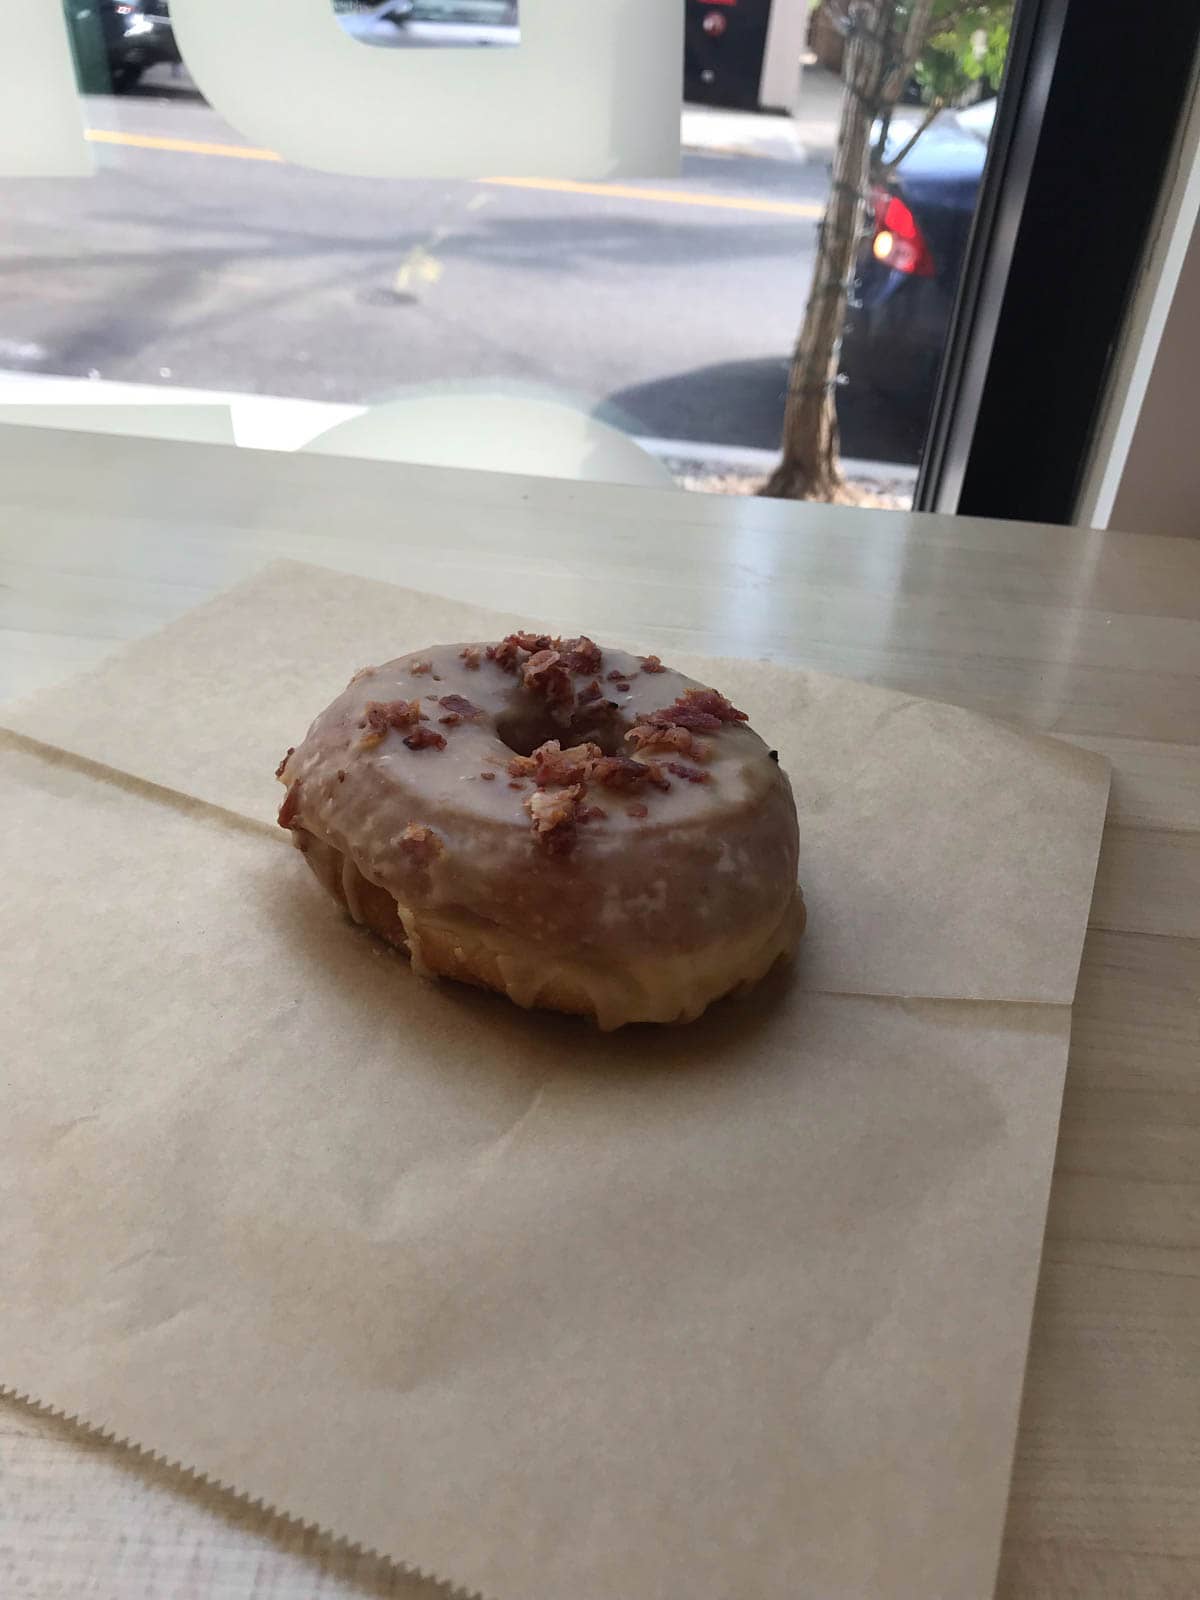 A doughnut on a piece of brown paper. The doughnut has pieces of maple bacon on it.